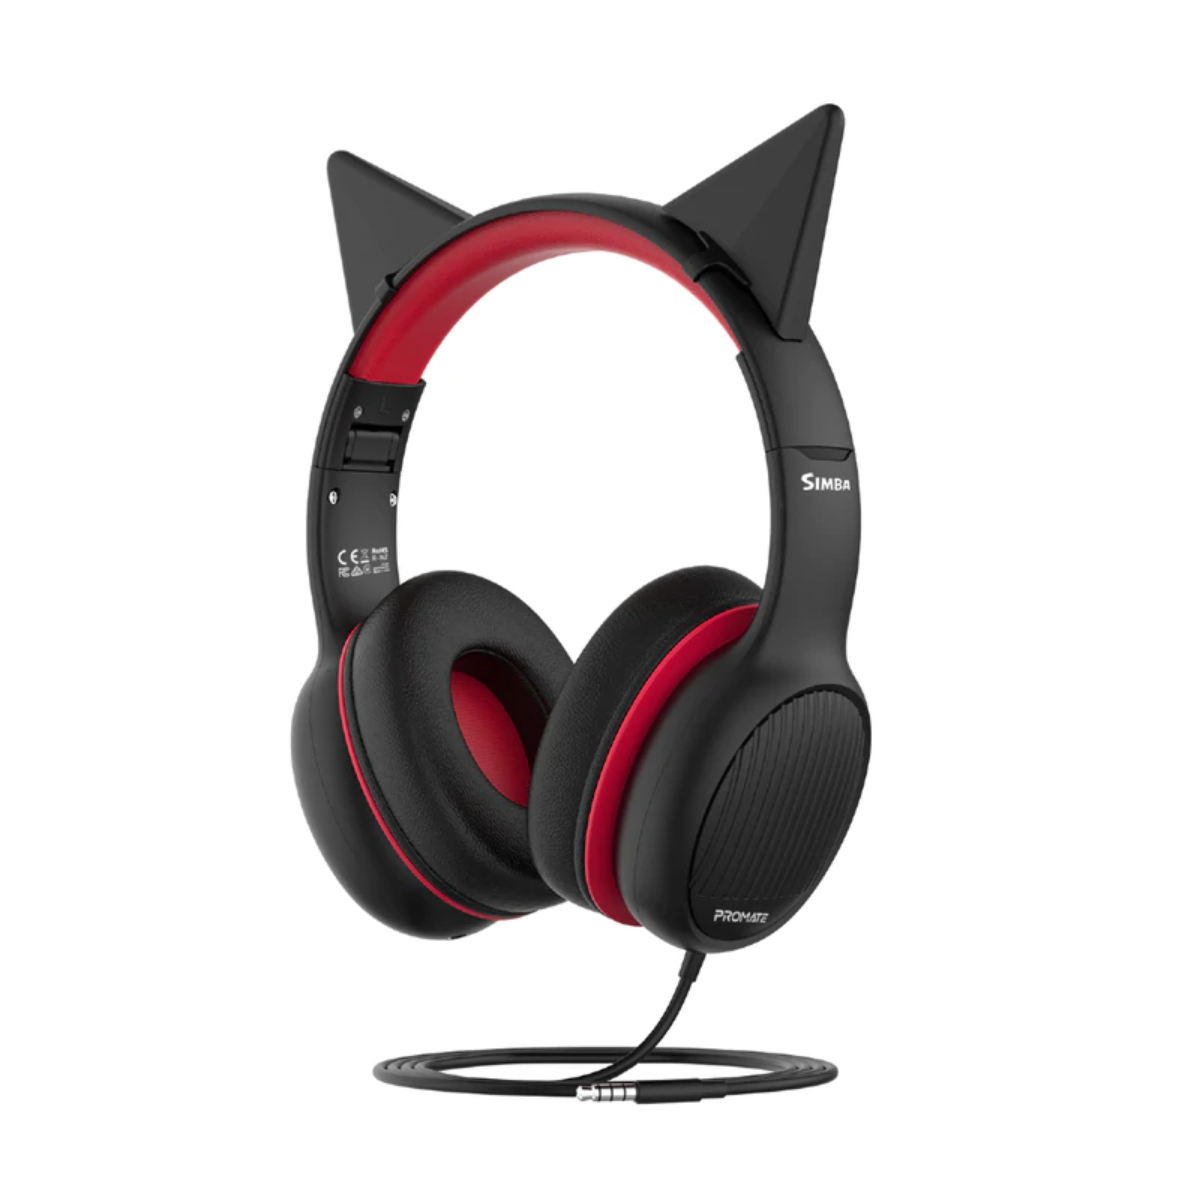 PROMATE Simba( Over-Ear Hi-Definition SafeAudio™ Wired Headset )